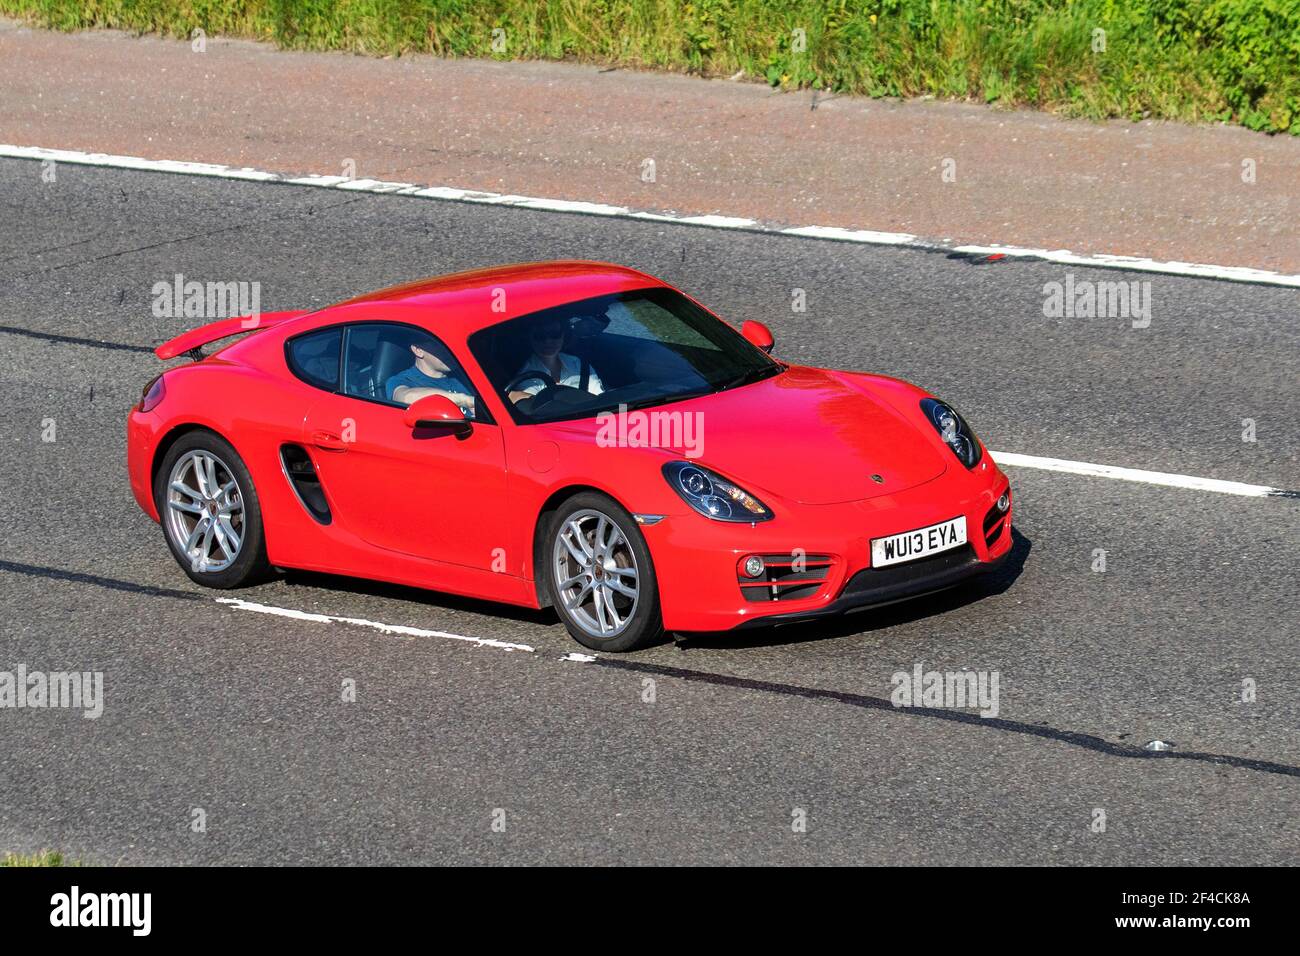 2013 guards red Porsche  Cayman S-A 2706cc petrol coupe; Vehicular traffic, moving vehicles, six-cylinder engine cars, vehicle driving on UK roads, motors, motoring on the M6 highway English motorway road network Stock Photo